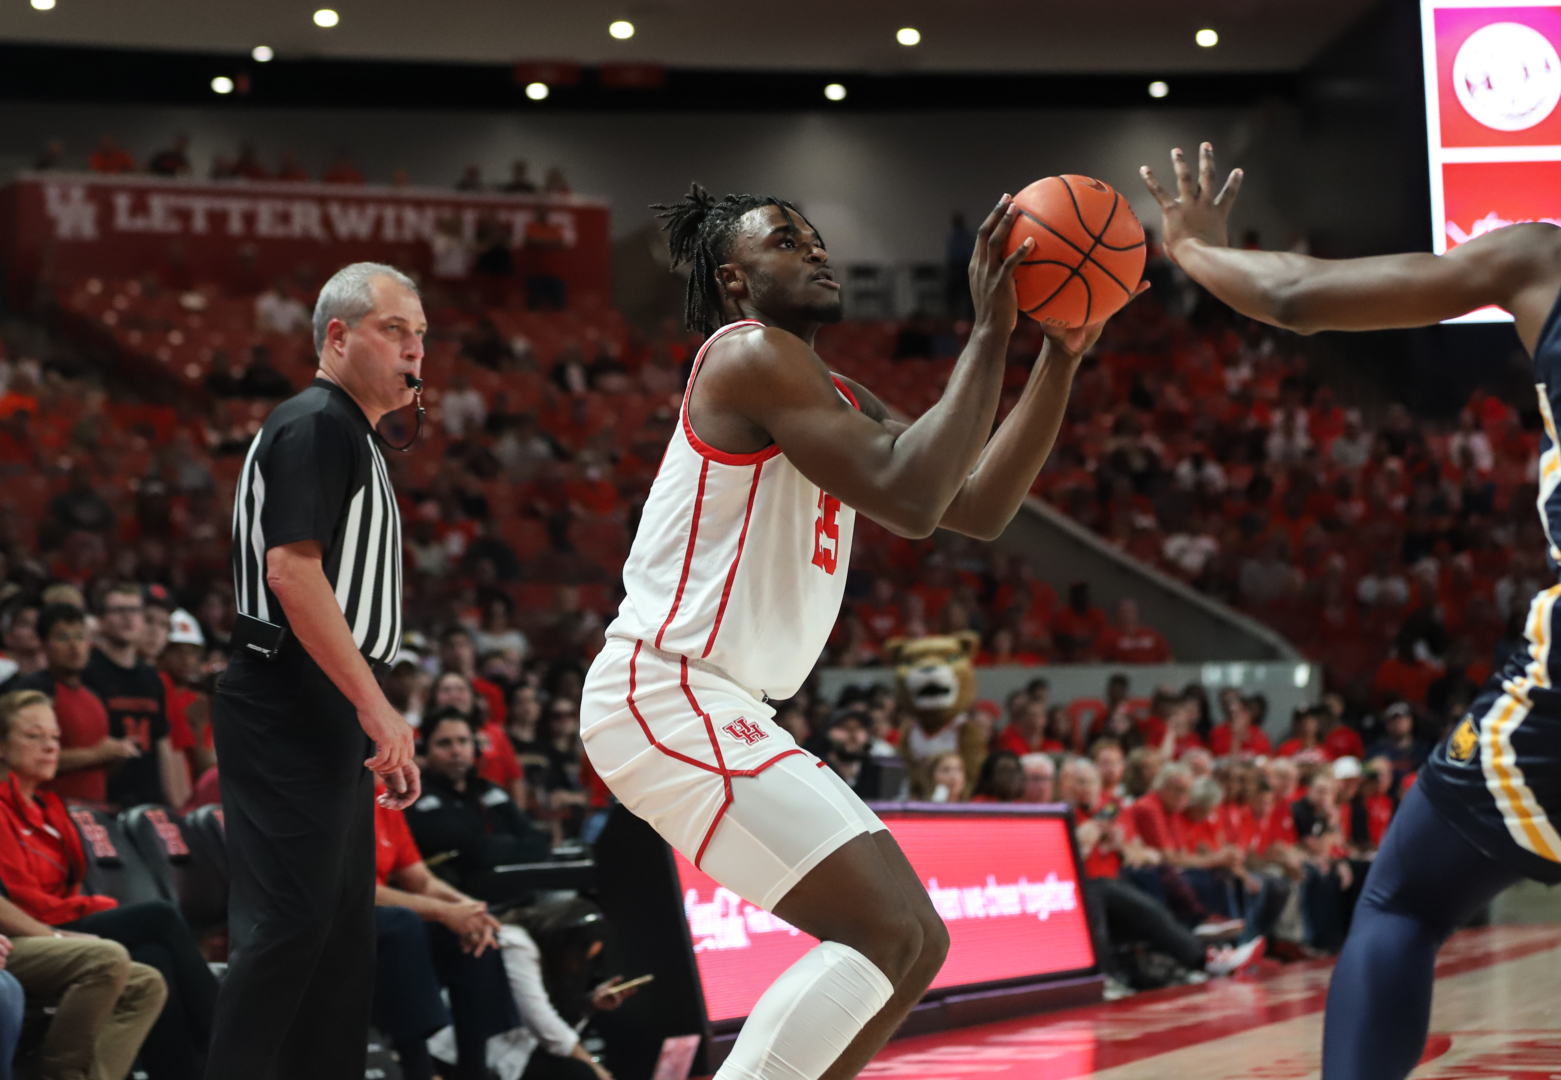 Freshman forward Jarace Walker scored a game-high 21 points in UH's win over St. Joseph's in the Veterans Classic . | Sean Thomas/The Cougar